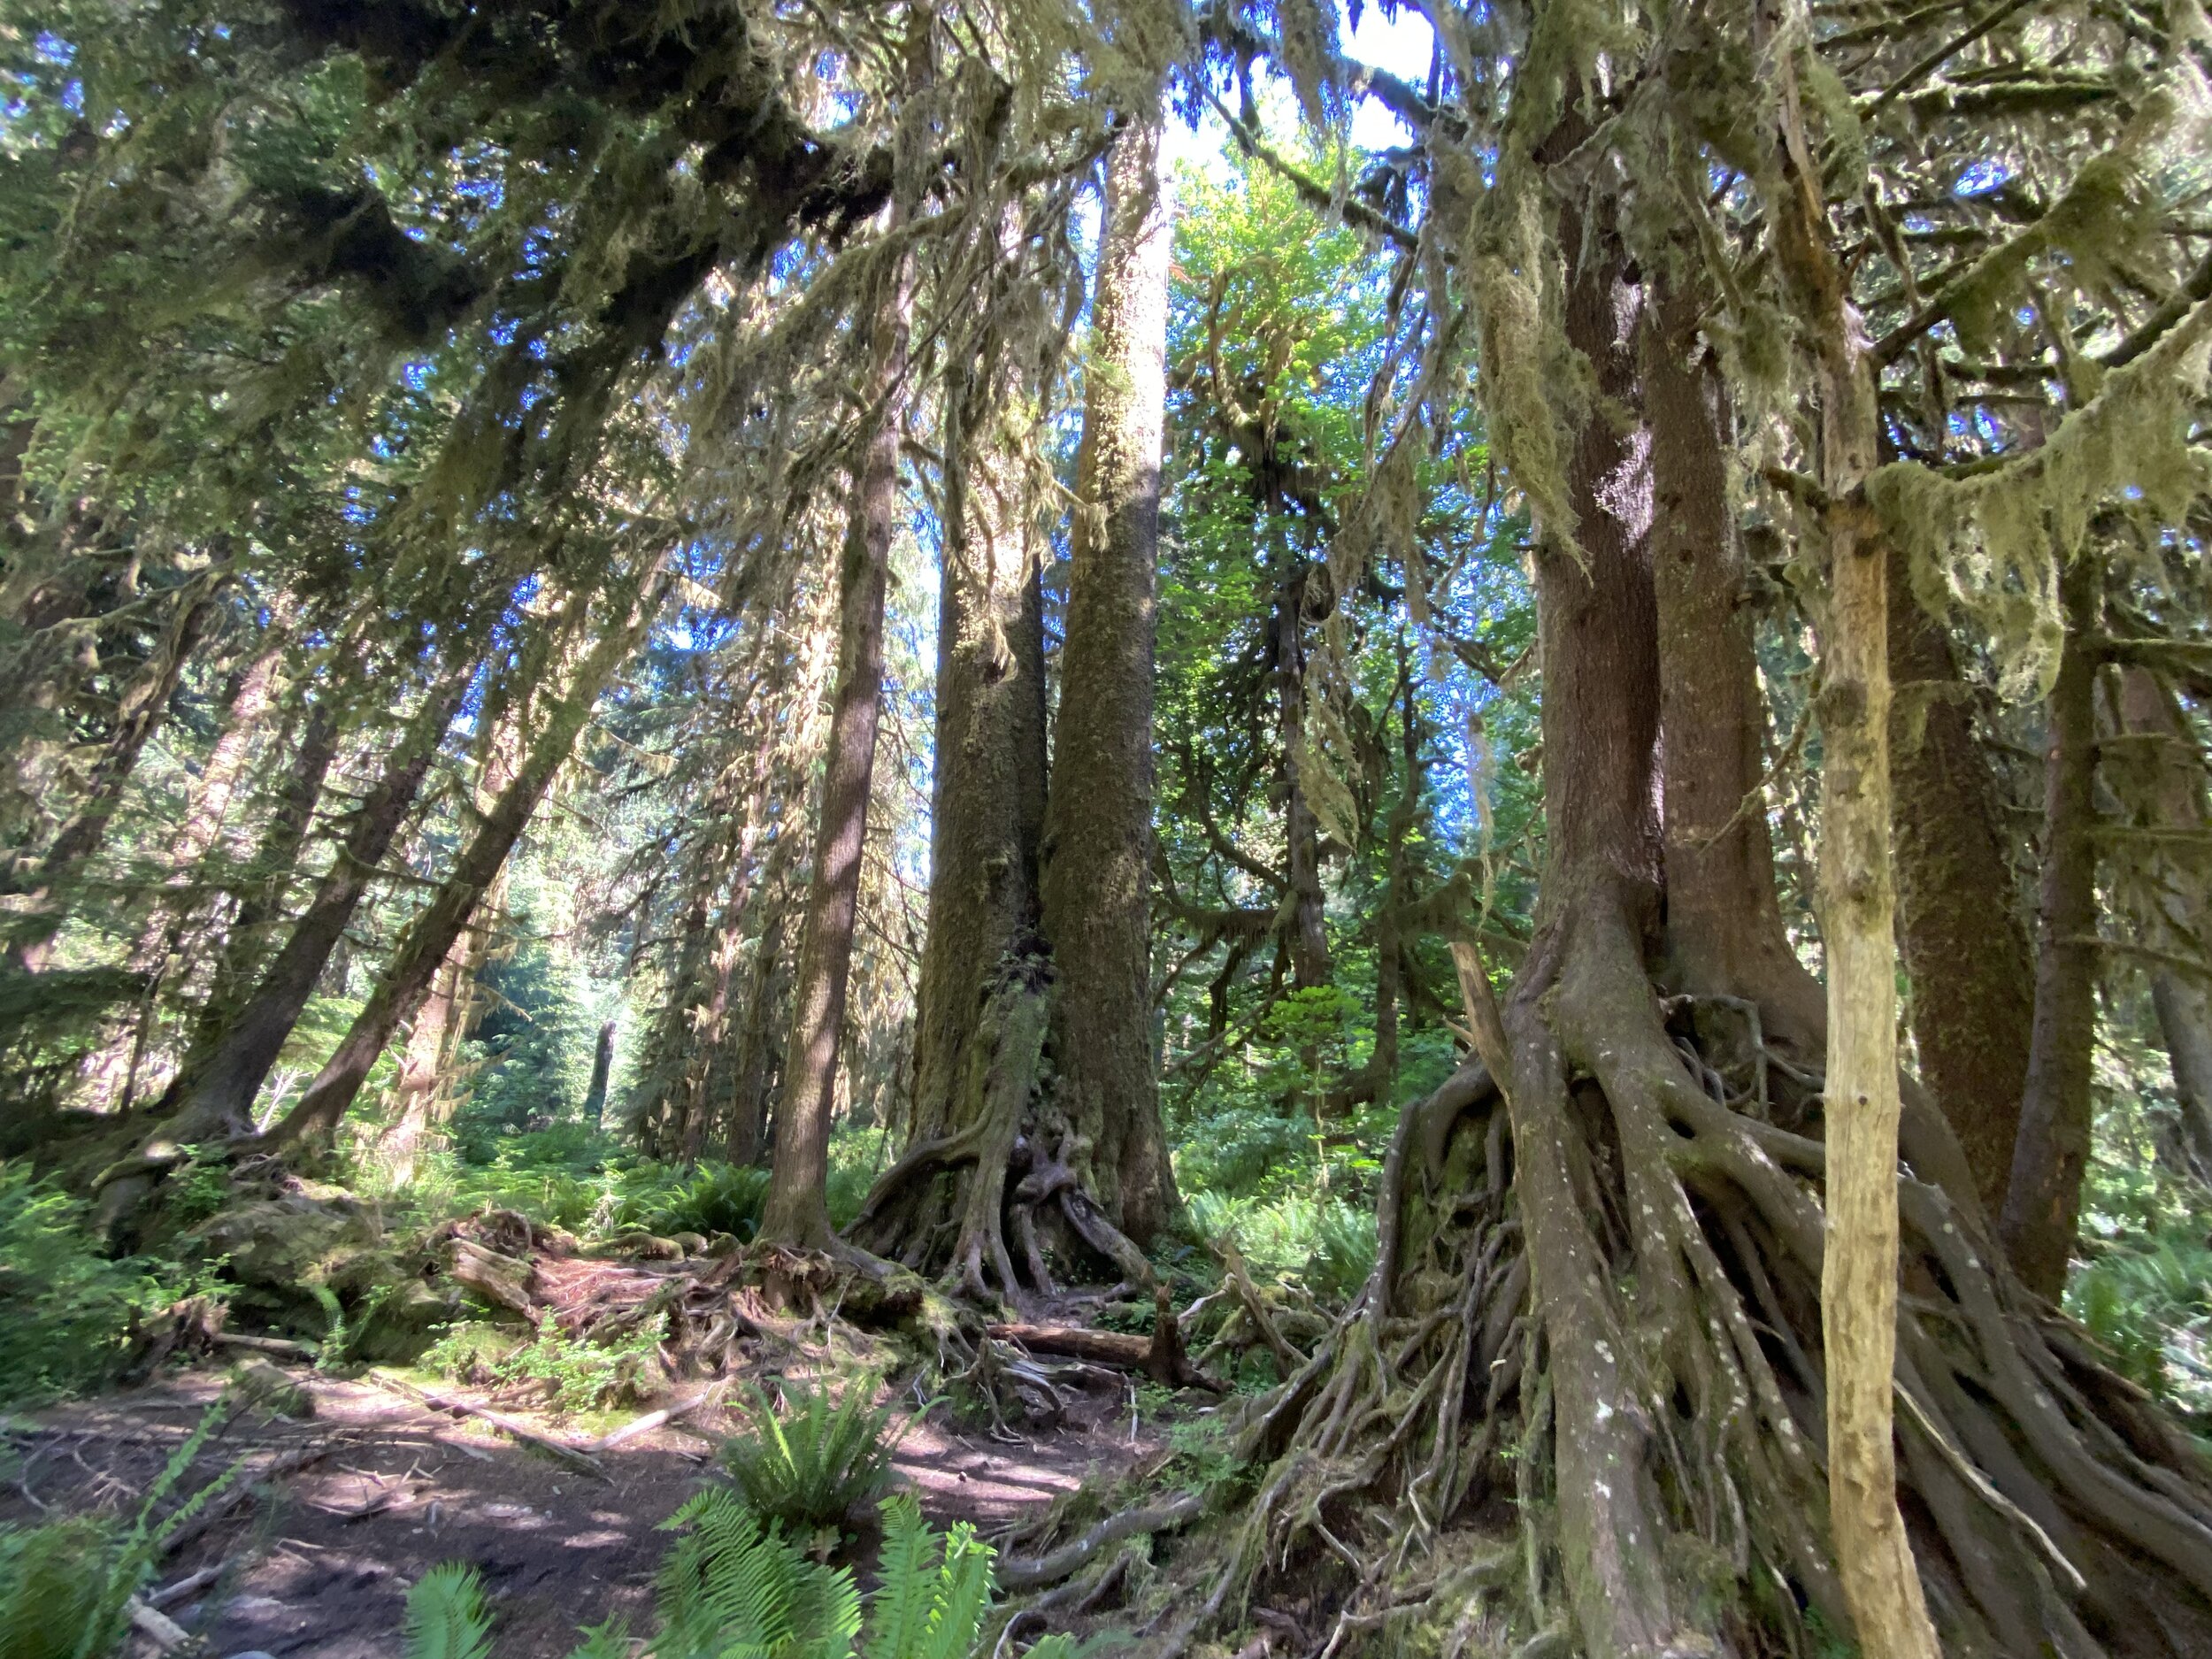 Amazing roots on old growth tree on the Hall of Mosses hike in Hoh Rainforest.  Photo by Karen Boudreaux, June 17, 2021